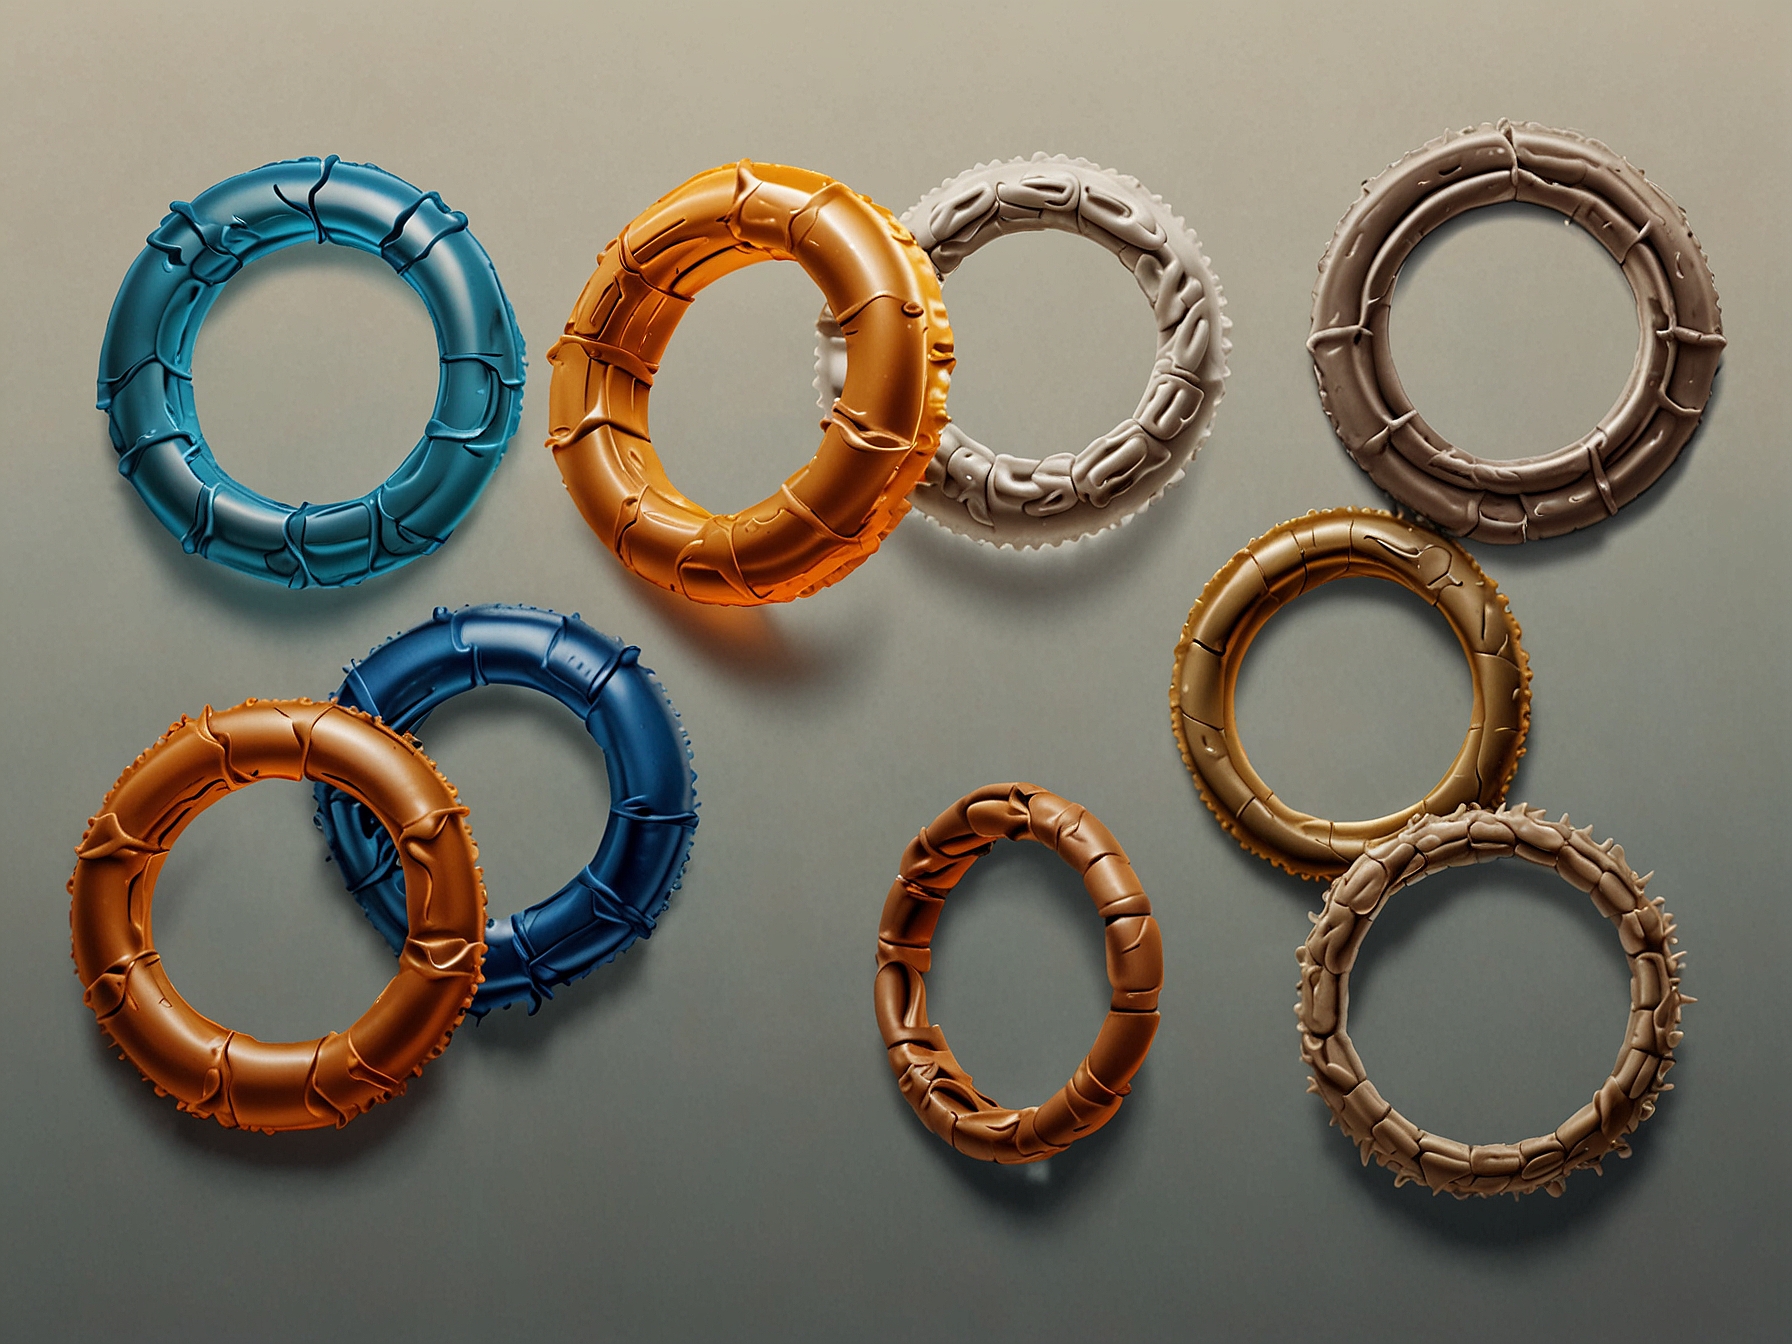 A comparison between traditional plastic 6-pack rings and an innovative biodegradable alternative made from barley. The image highlights the eco-friendly solution as a safer option for marine environments.